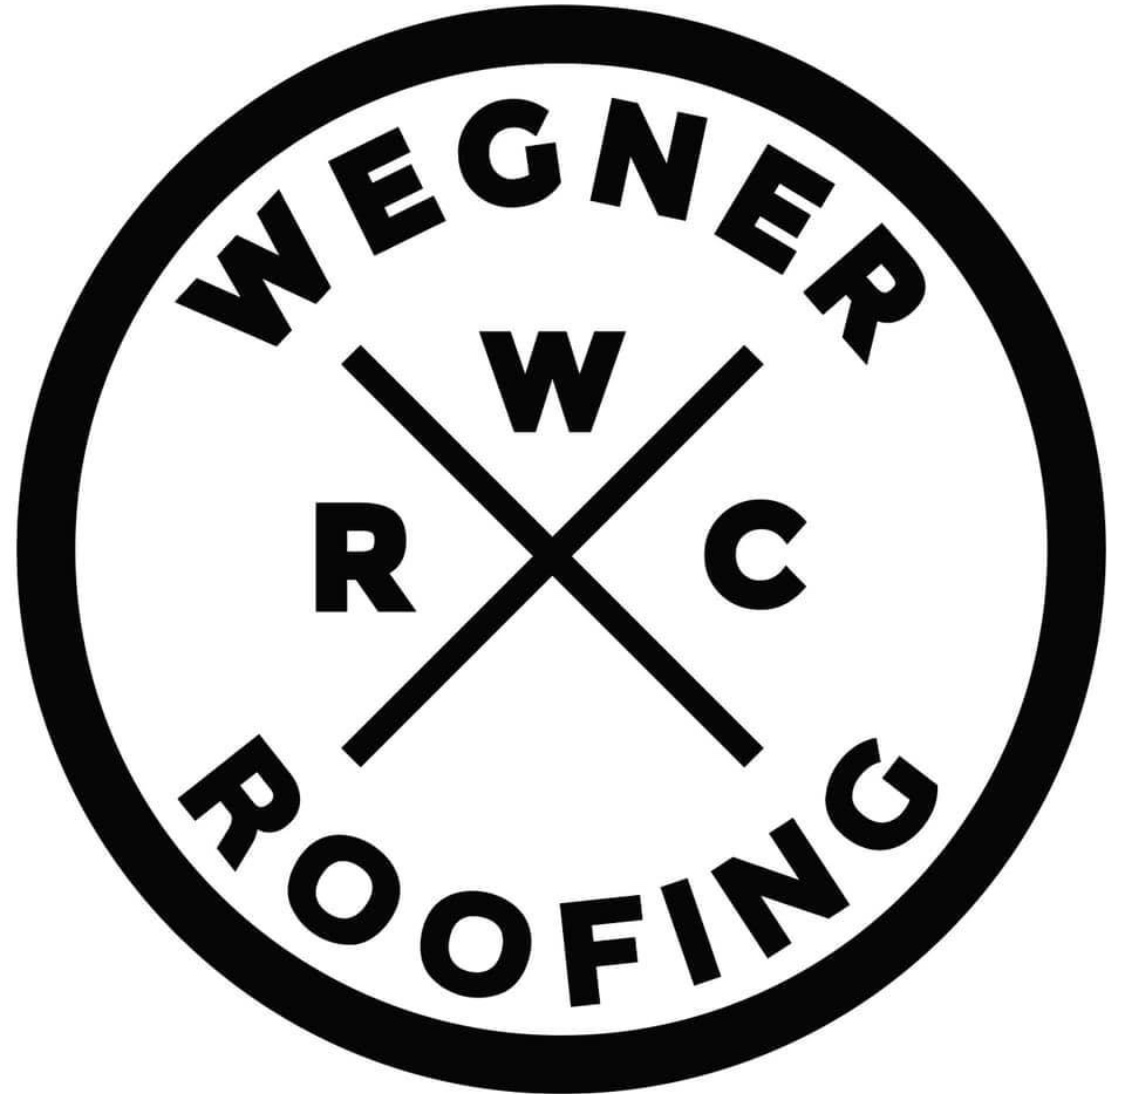 Wegner Roofing and Construction is Offering Incredible Financing Solutions for Home Remodeling